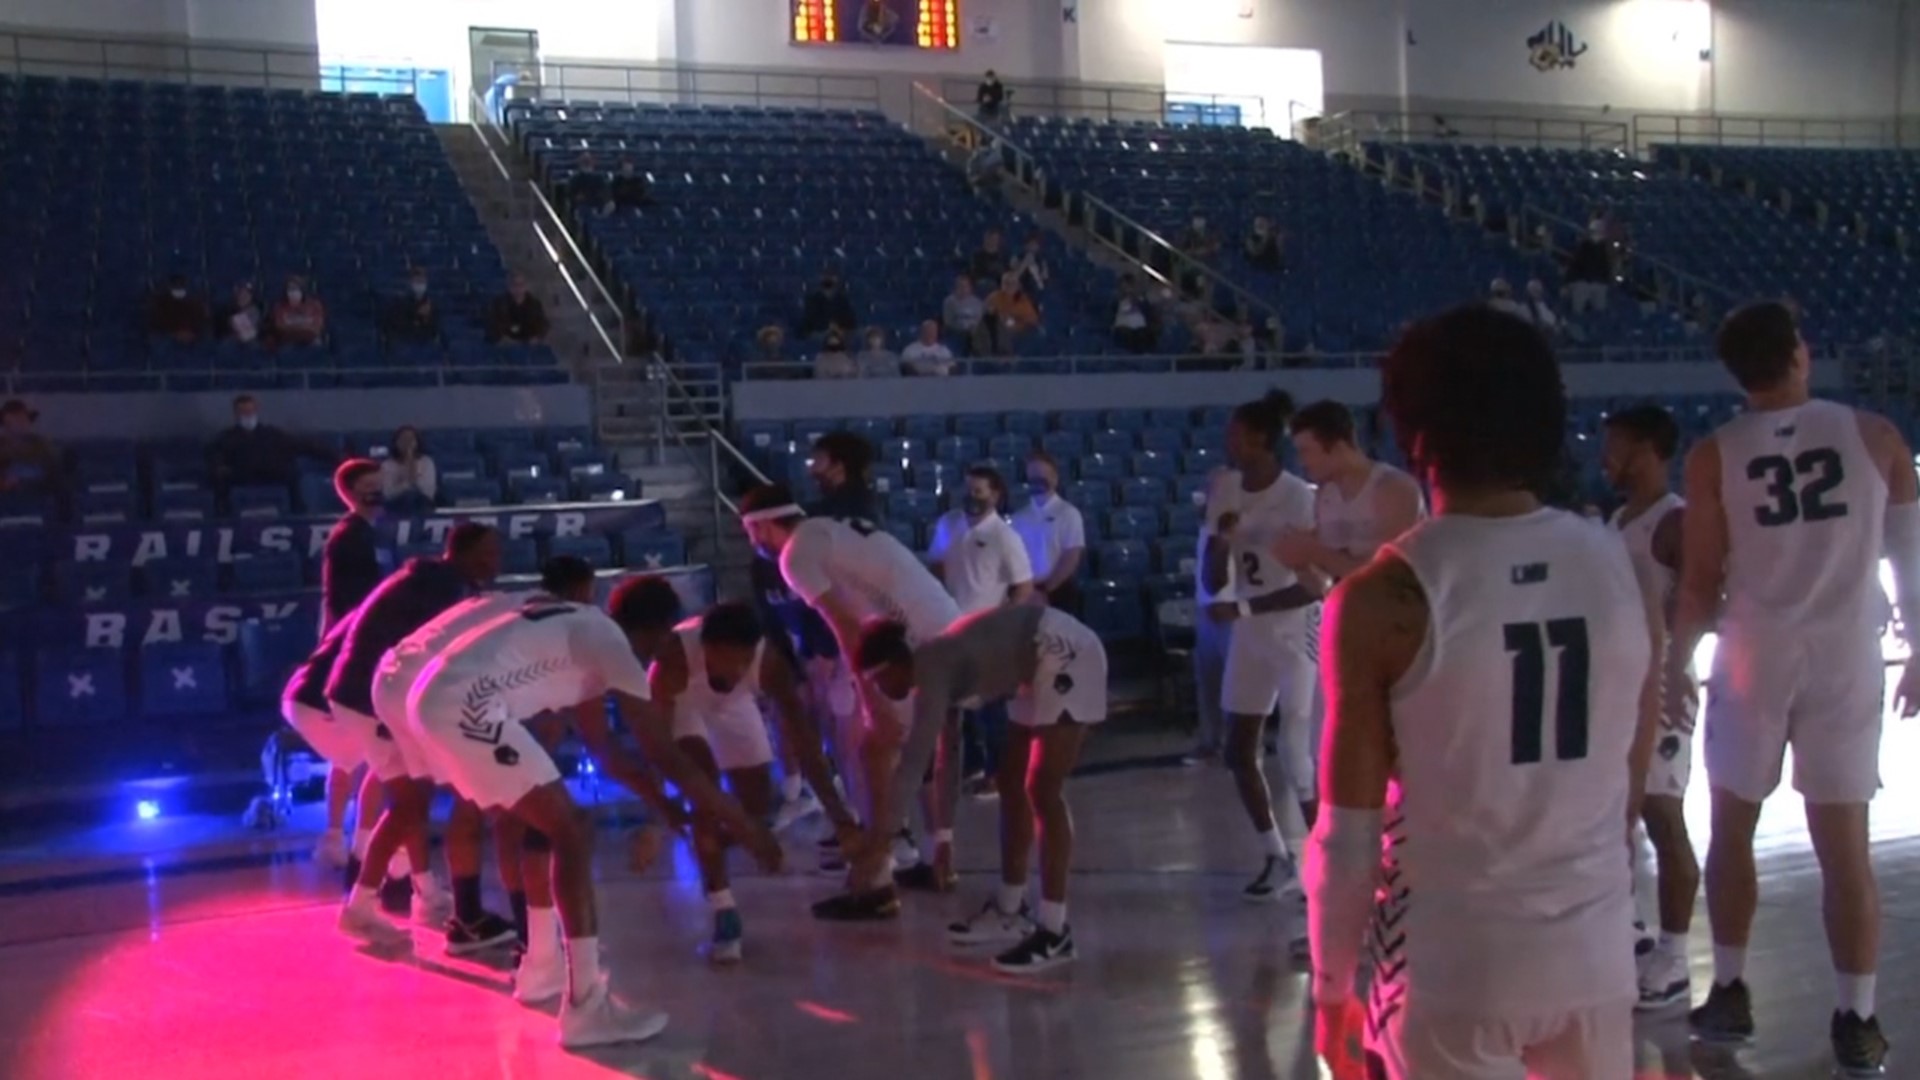 The UAH Chargers have already seen multiple, last-minute schedule changes due to the coronavirus.